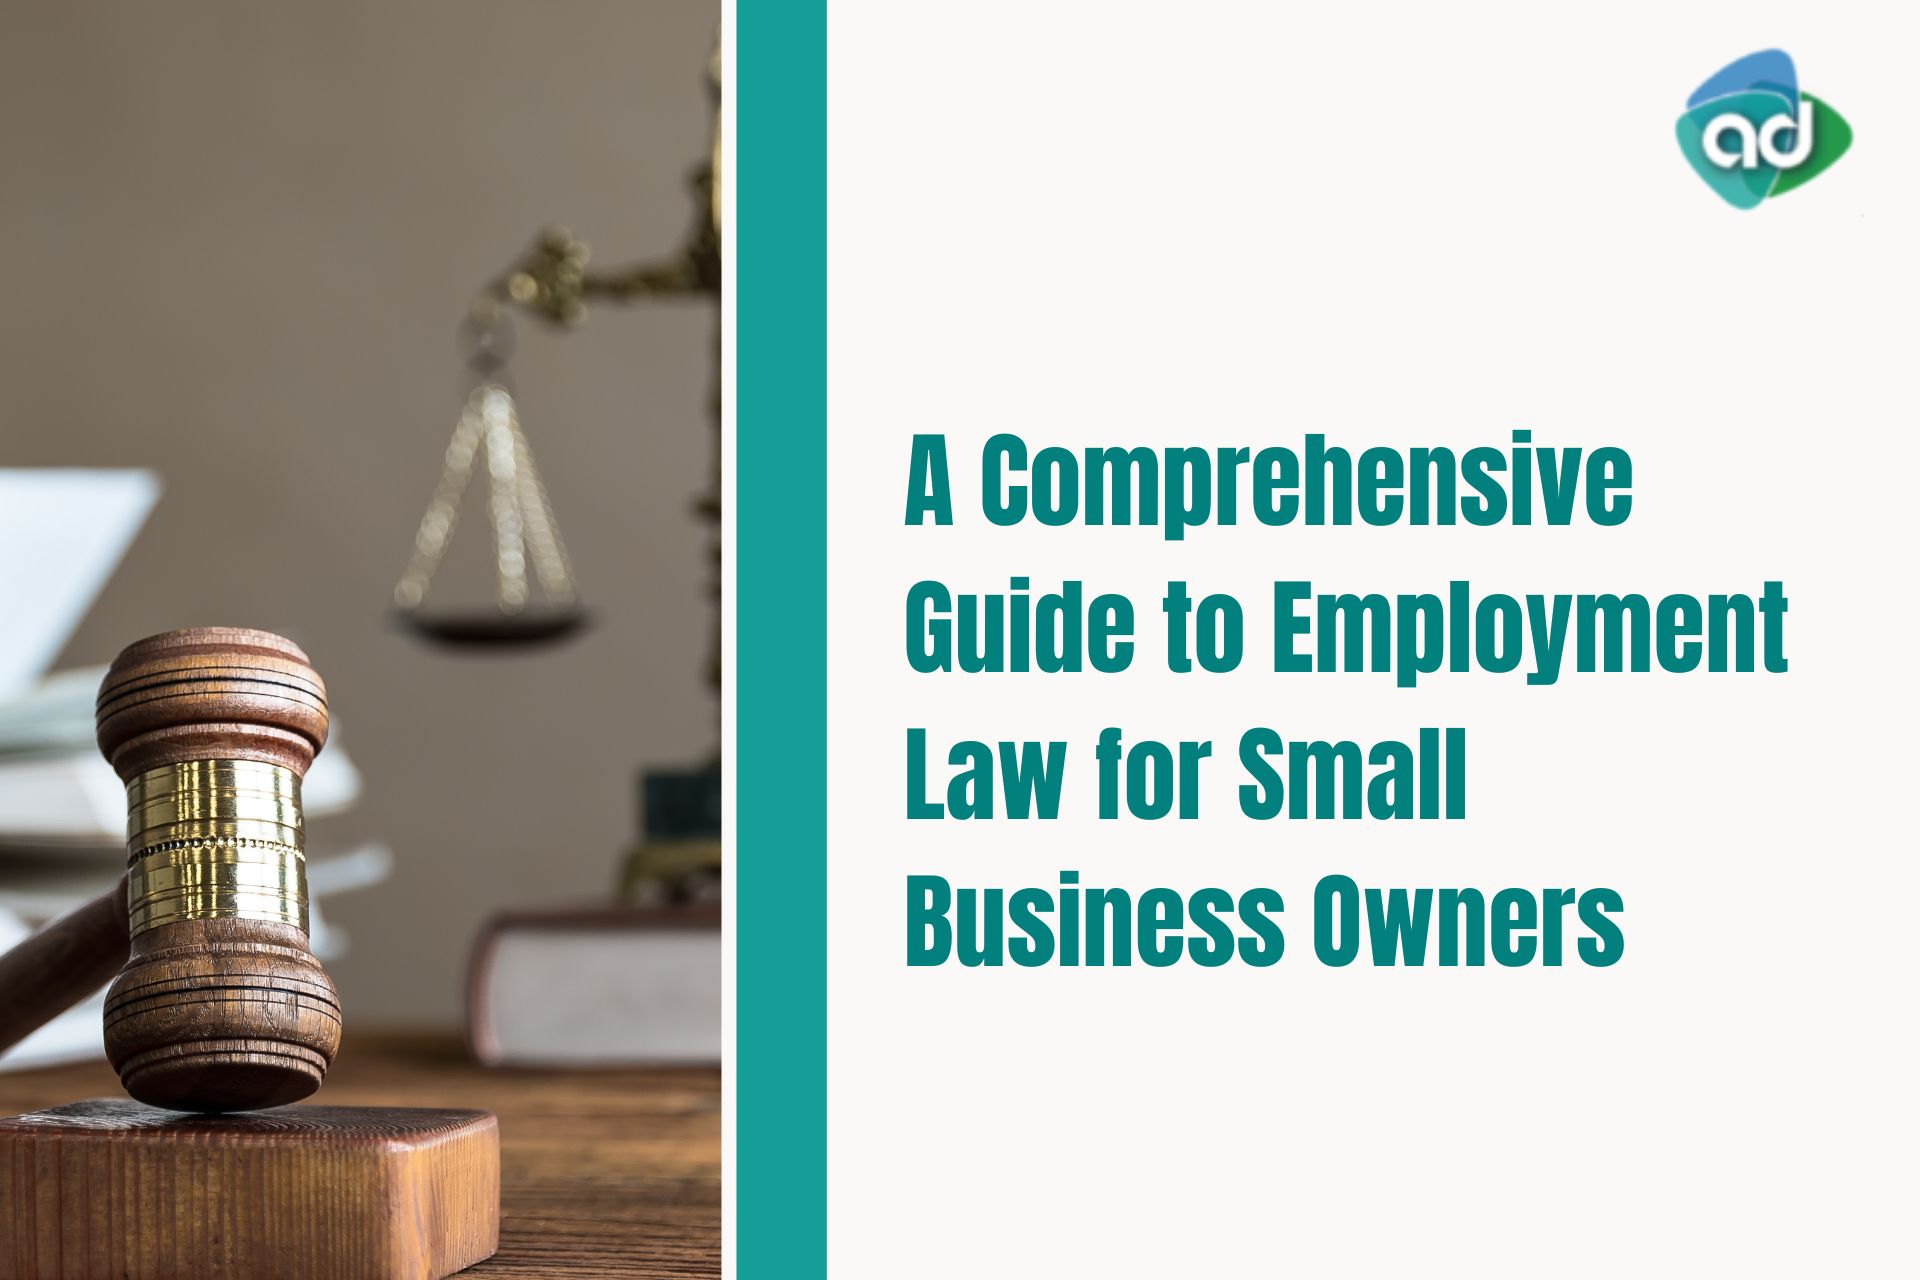 A Comprehensive Guide to Employment Law for Small Business Owners